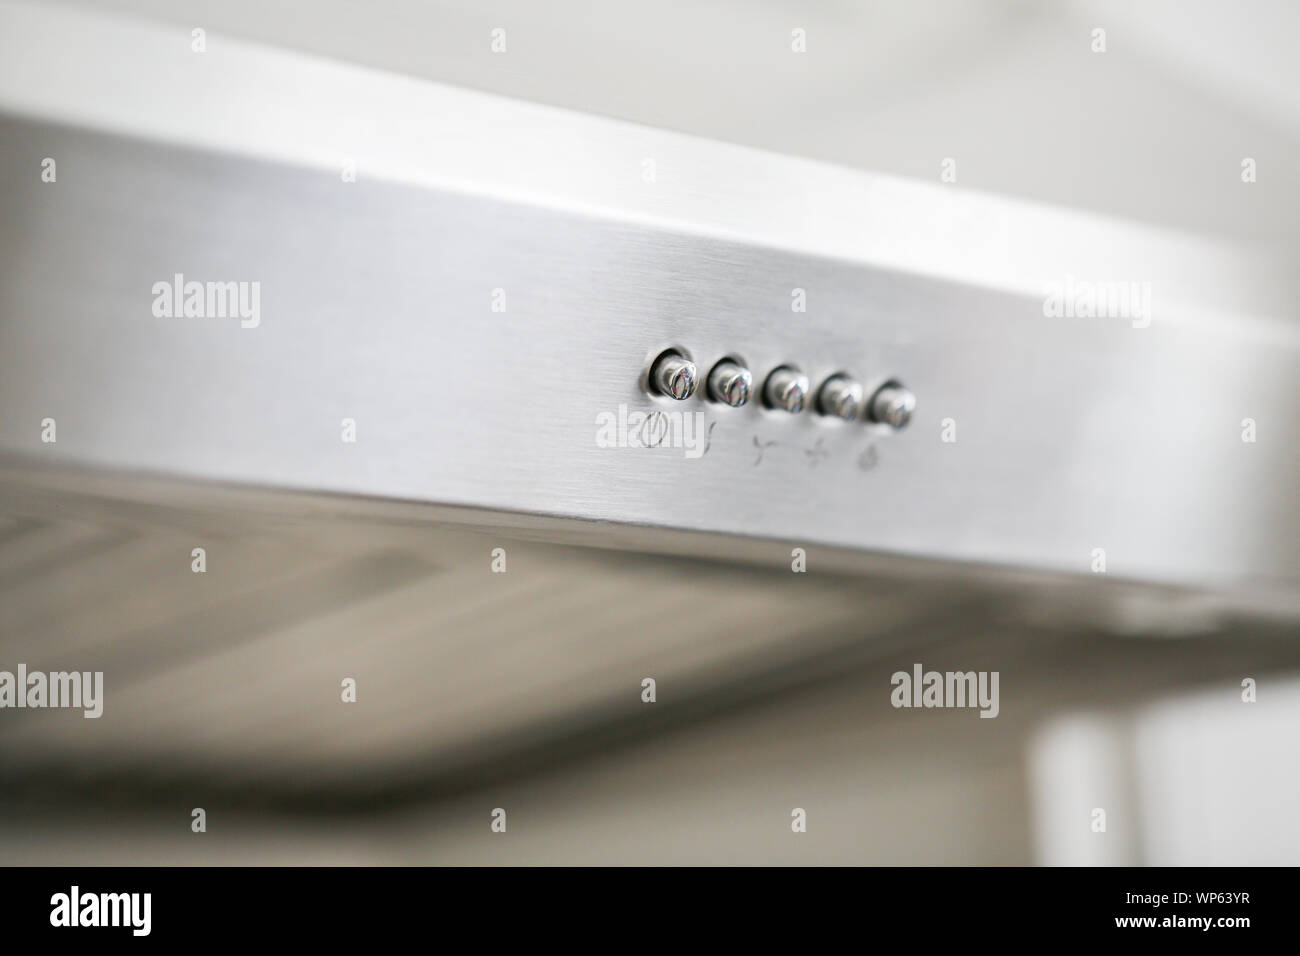 Range Hood. Stainless Steel Wall Mount Cooking Canopy. Fume Extractor. Electric Chimney. Domestic and Kitchen Major Appliances - Image Stock Photo